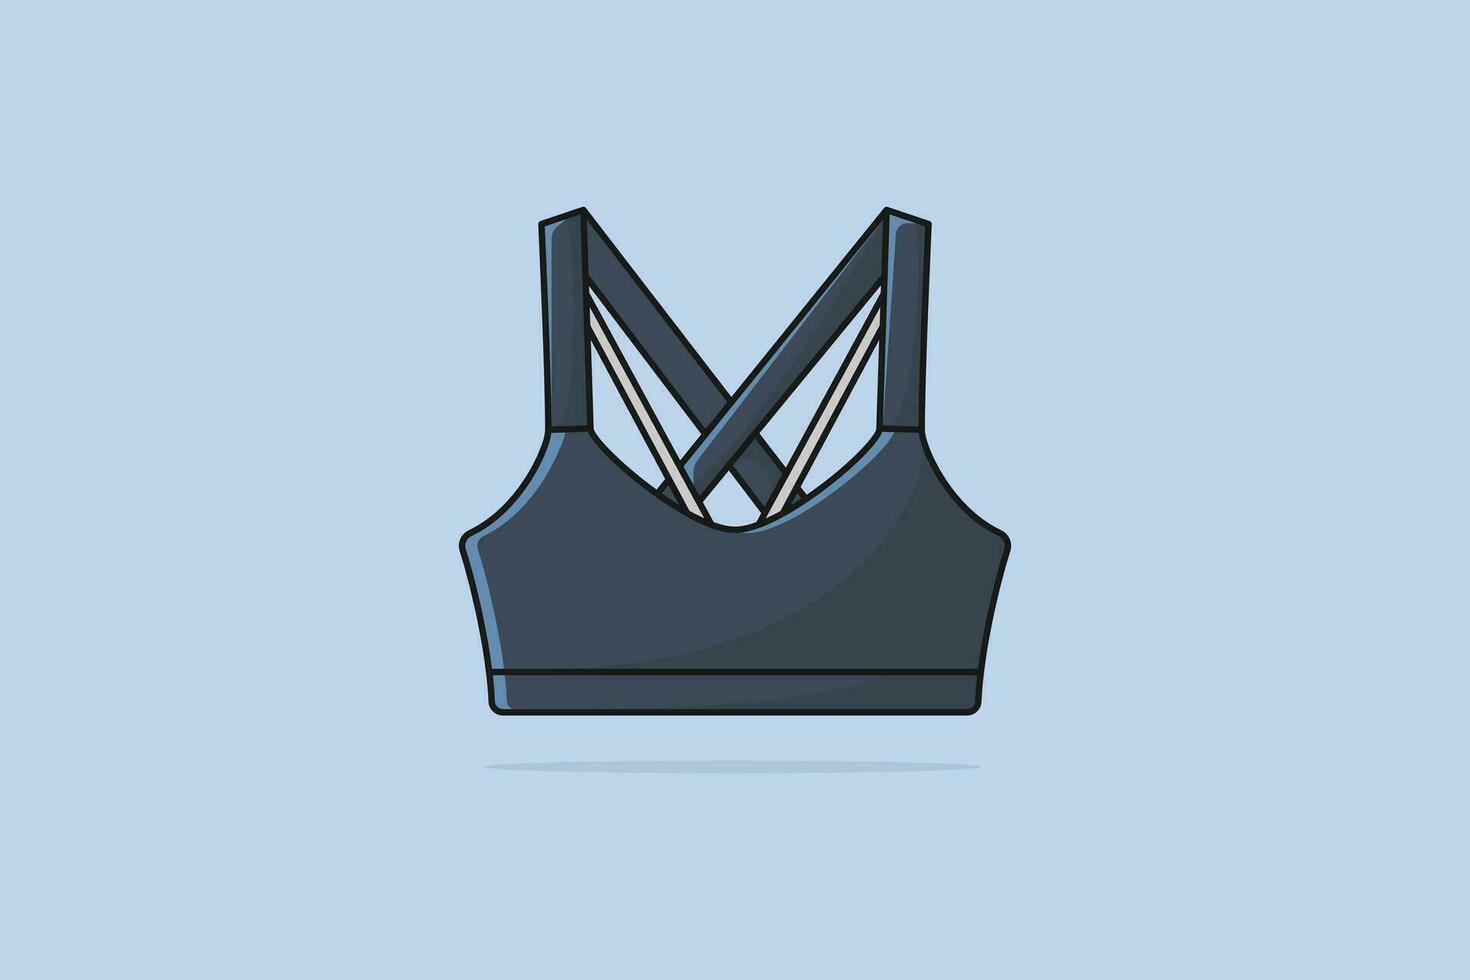 Vibrant Asymmetric Gym Bra For Women vector illustration. Sports and fashion objects icon concept. Sports and gym bra for women and girls Wear vector design with shadow.